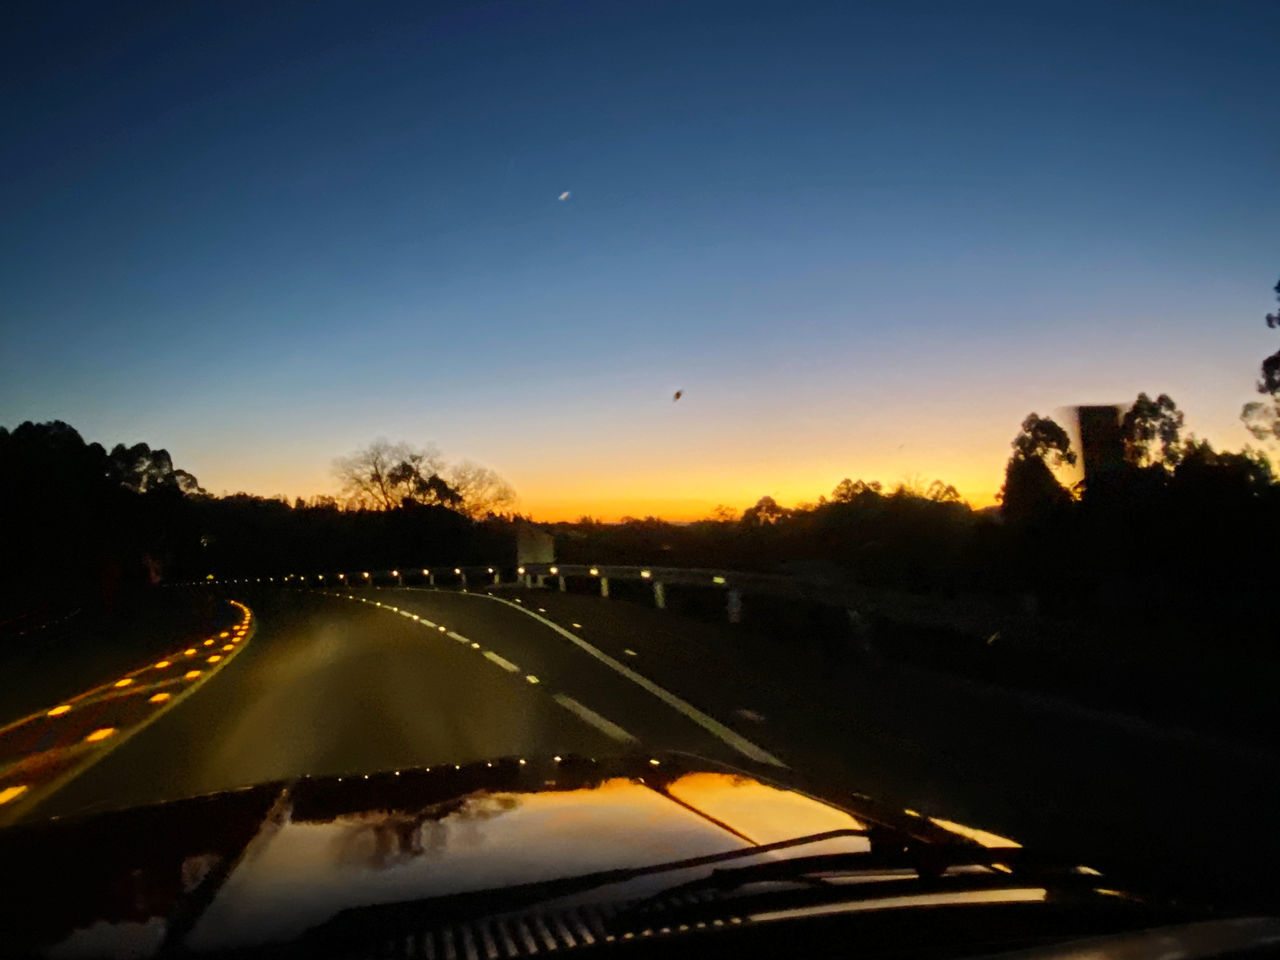 ROAD SEEN THROUGH CAR WINDSHIELD DURING SUNSET